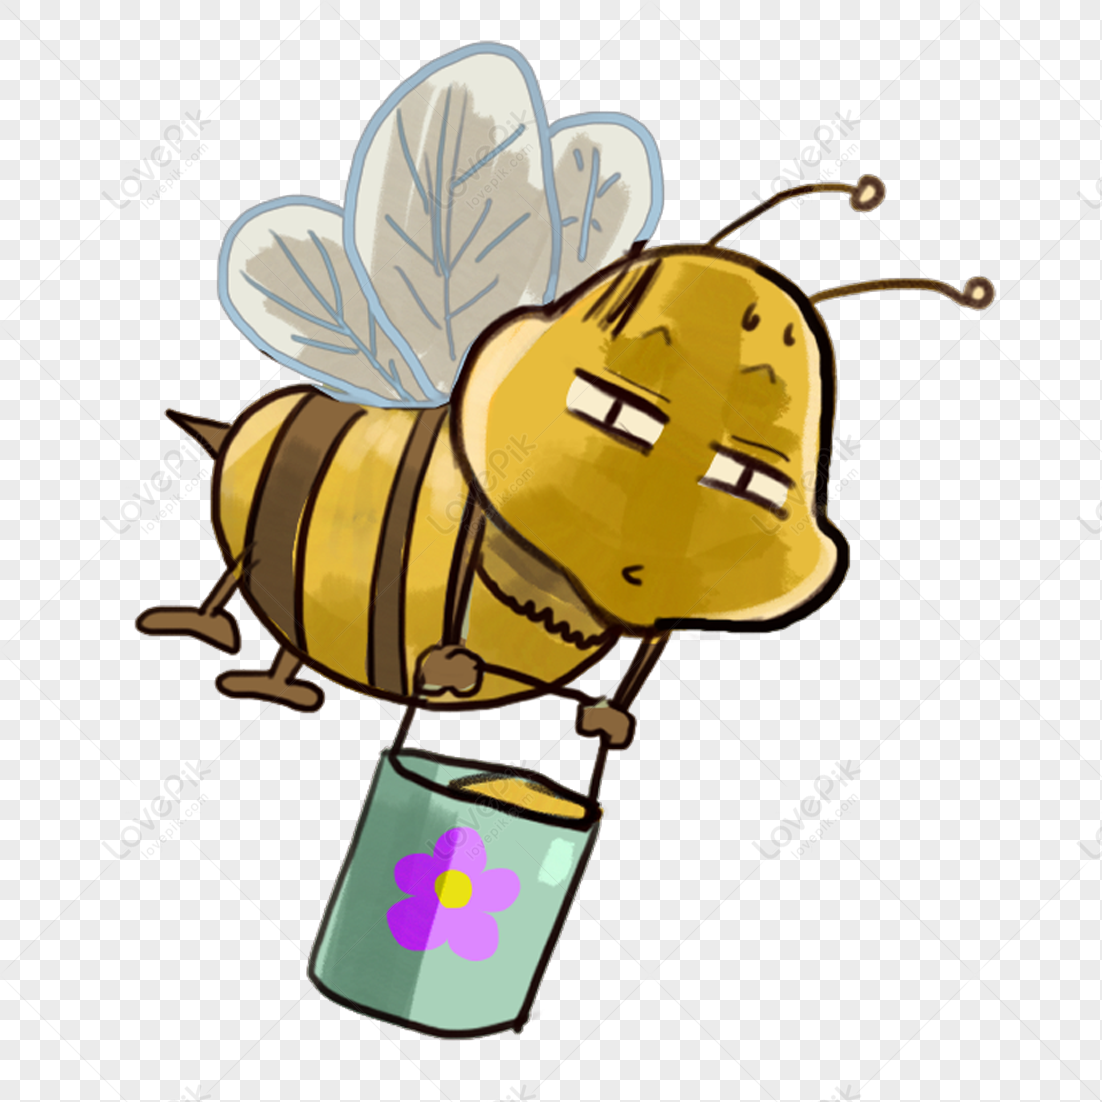 Cartoon Bee PNG Free Download And Clipart Image For Free Download - Lovepik  | 400225493